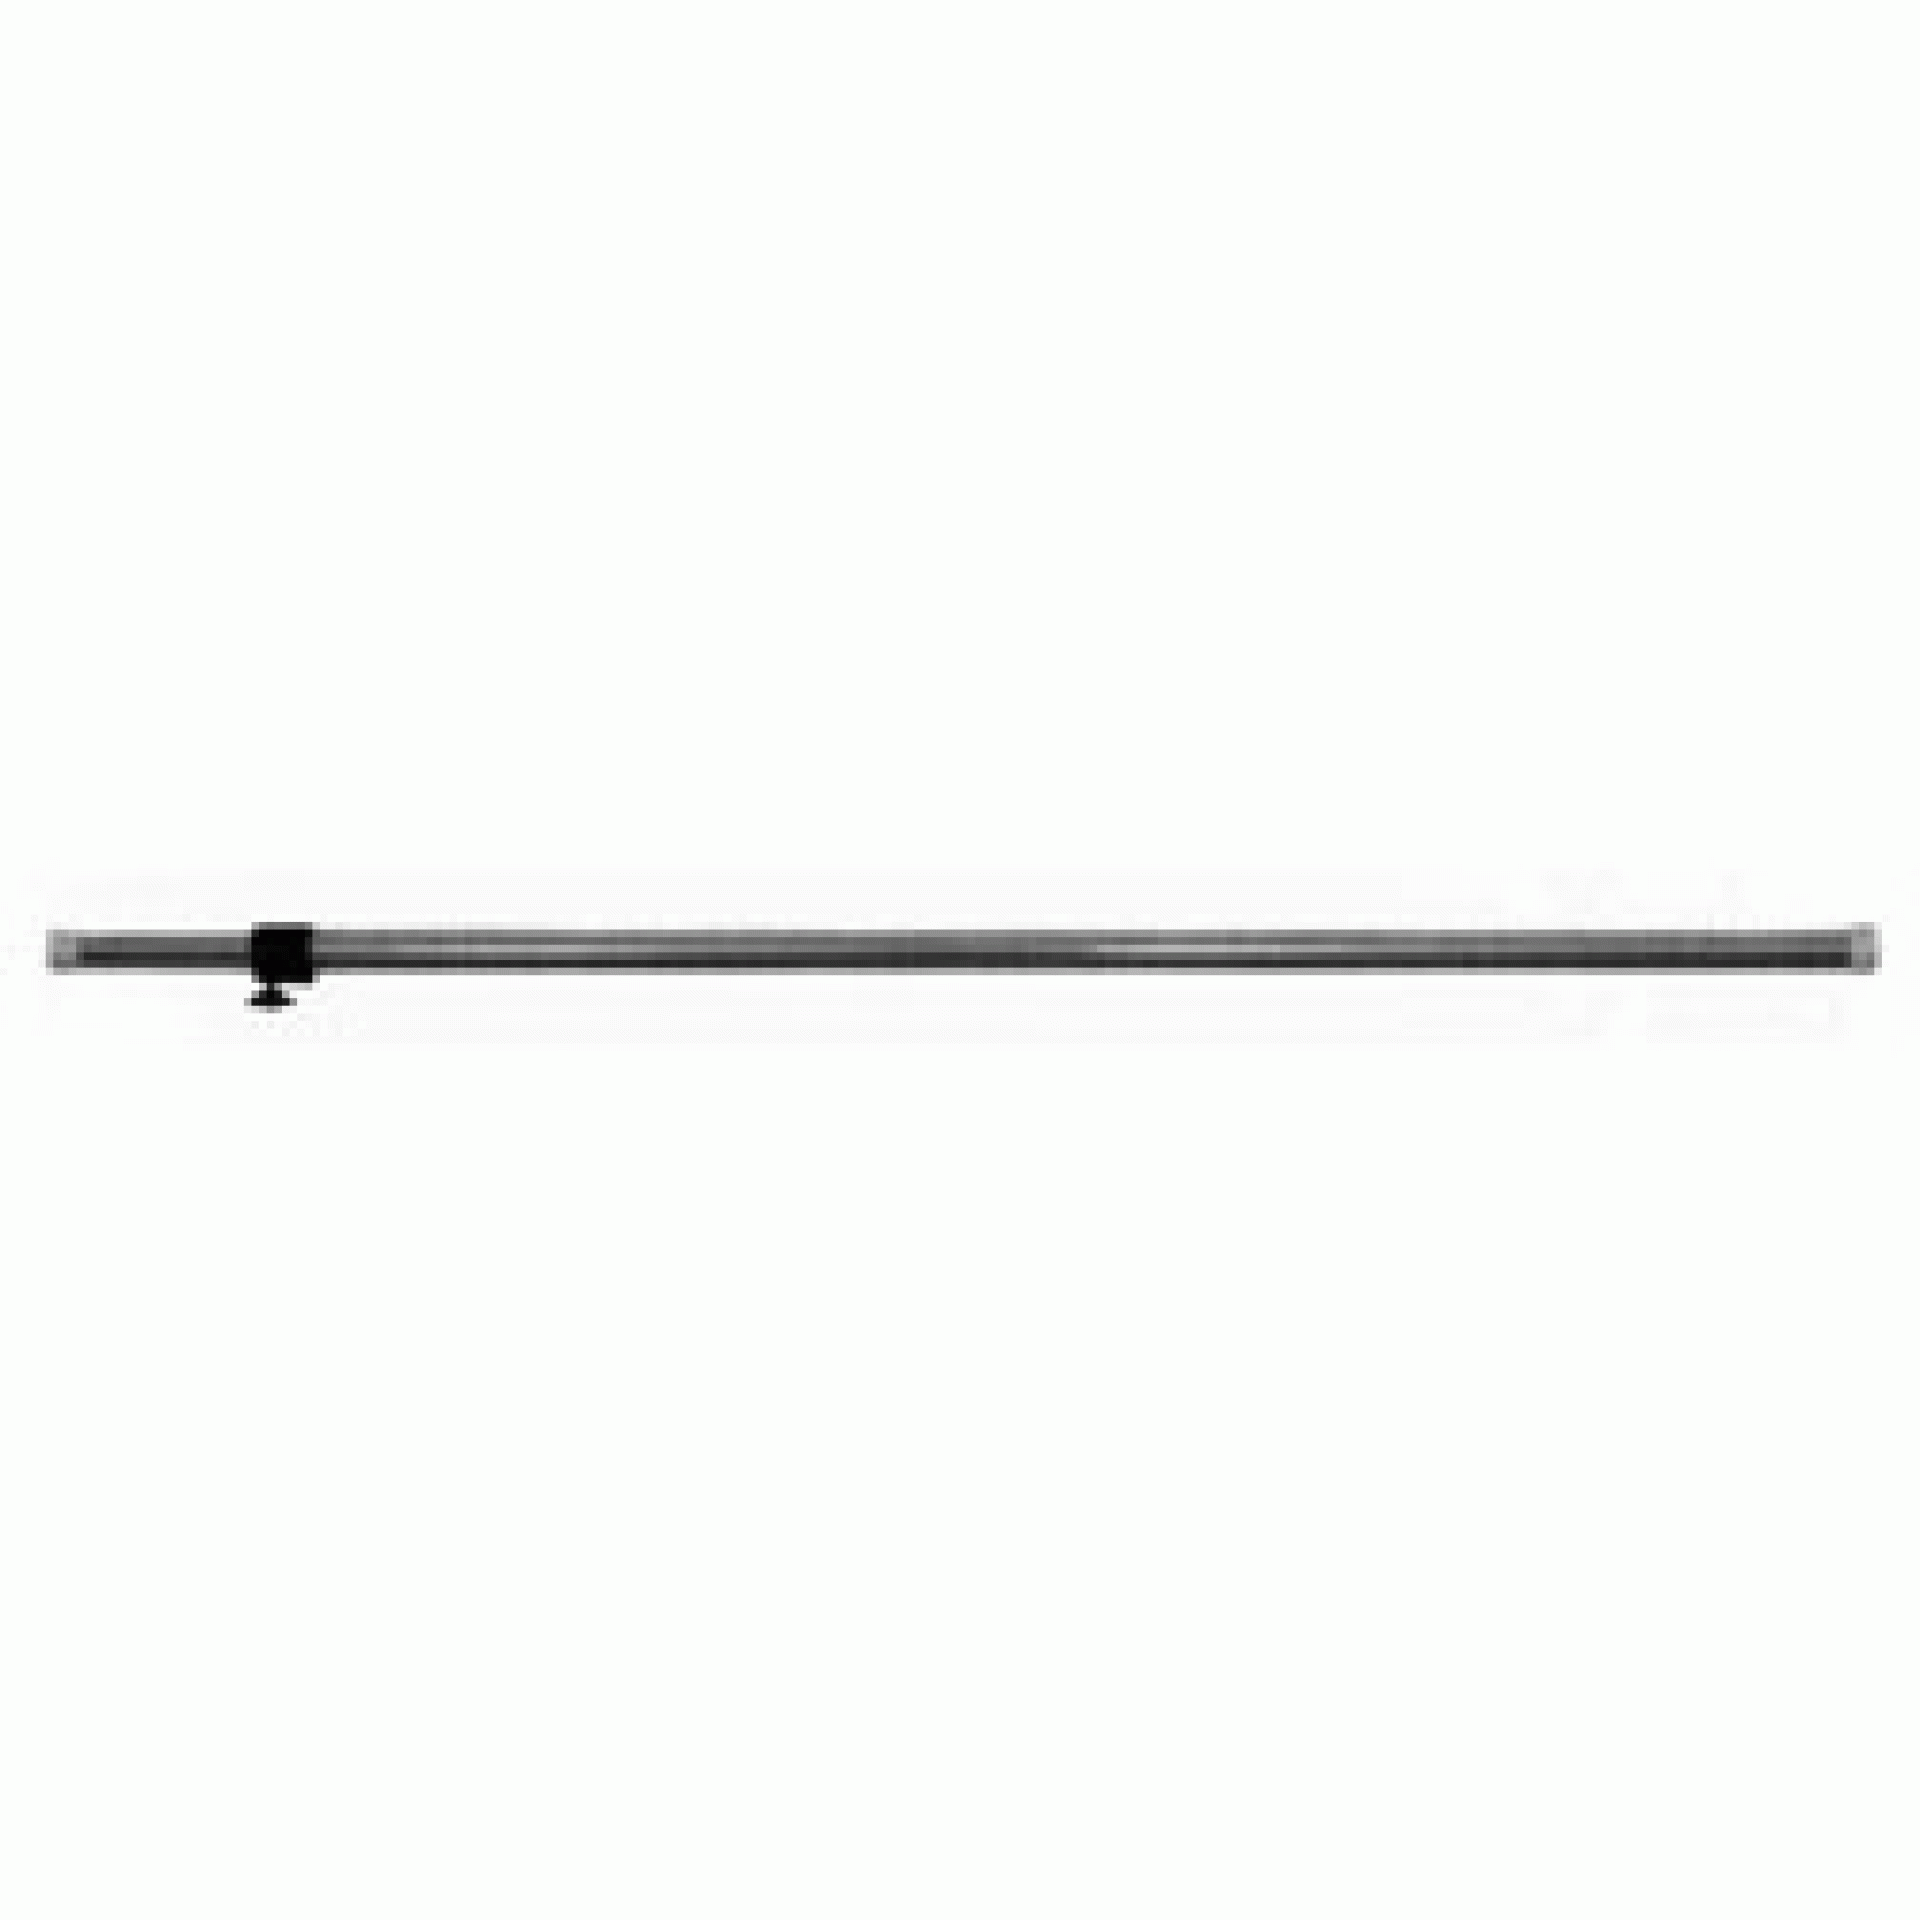 ADJUSTABLE ECONOMY COVER SUPPORT Pole - 36"  -64"